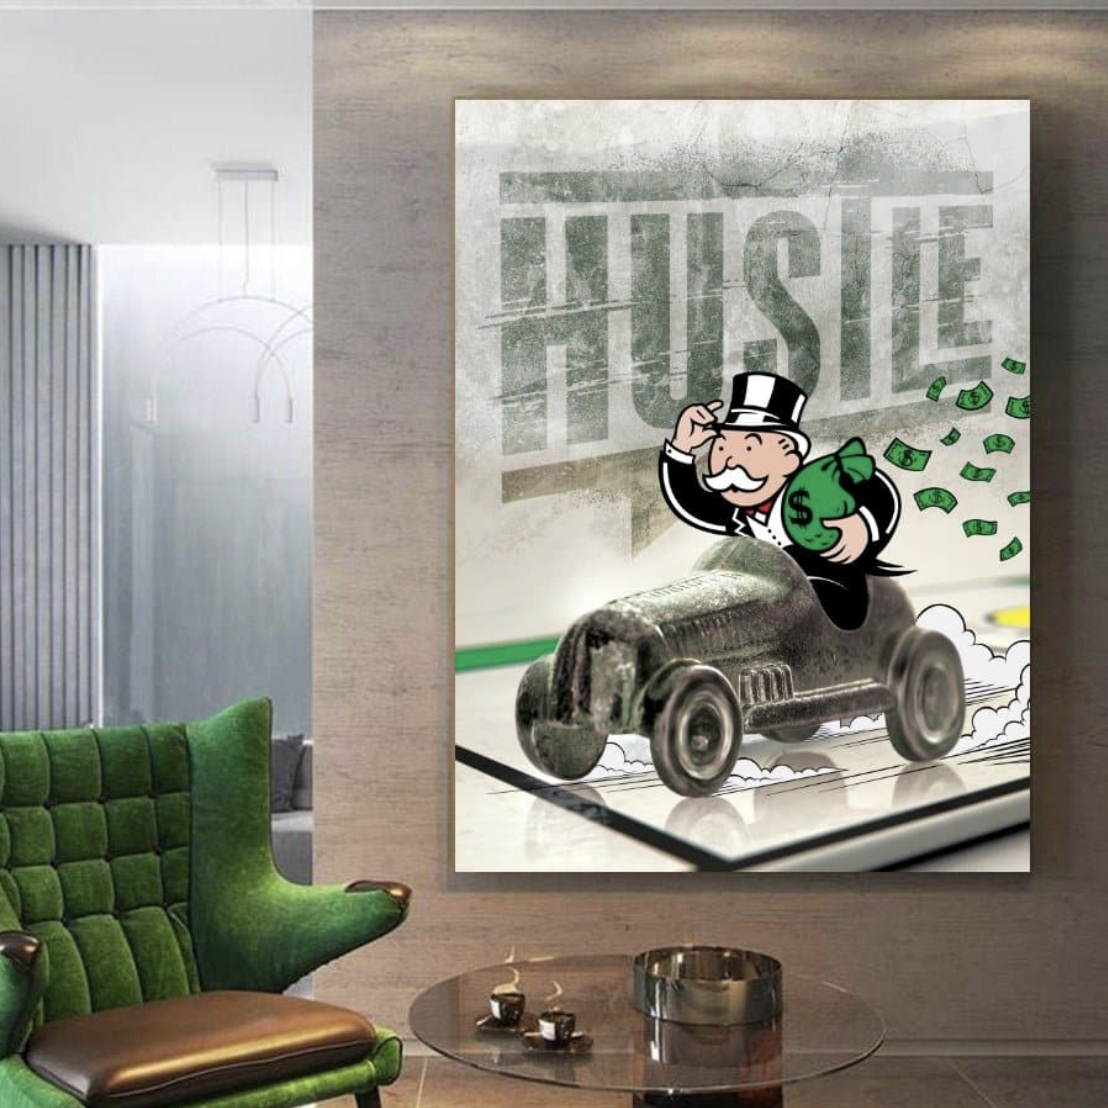 Monopoly Man Hustle Canvas Art: Add Fun and Style to Your Space